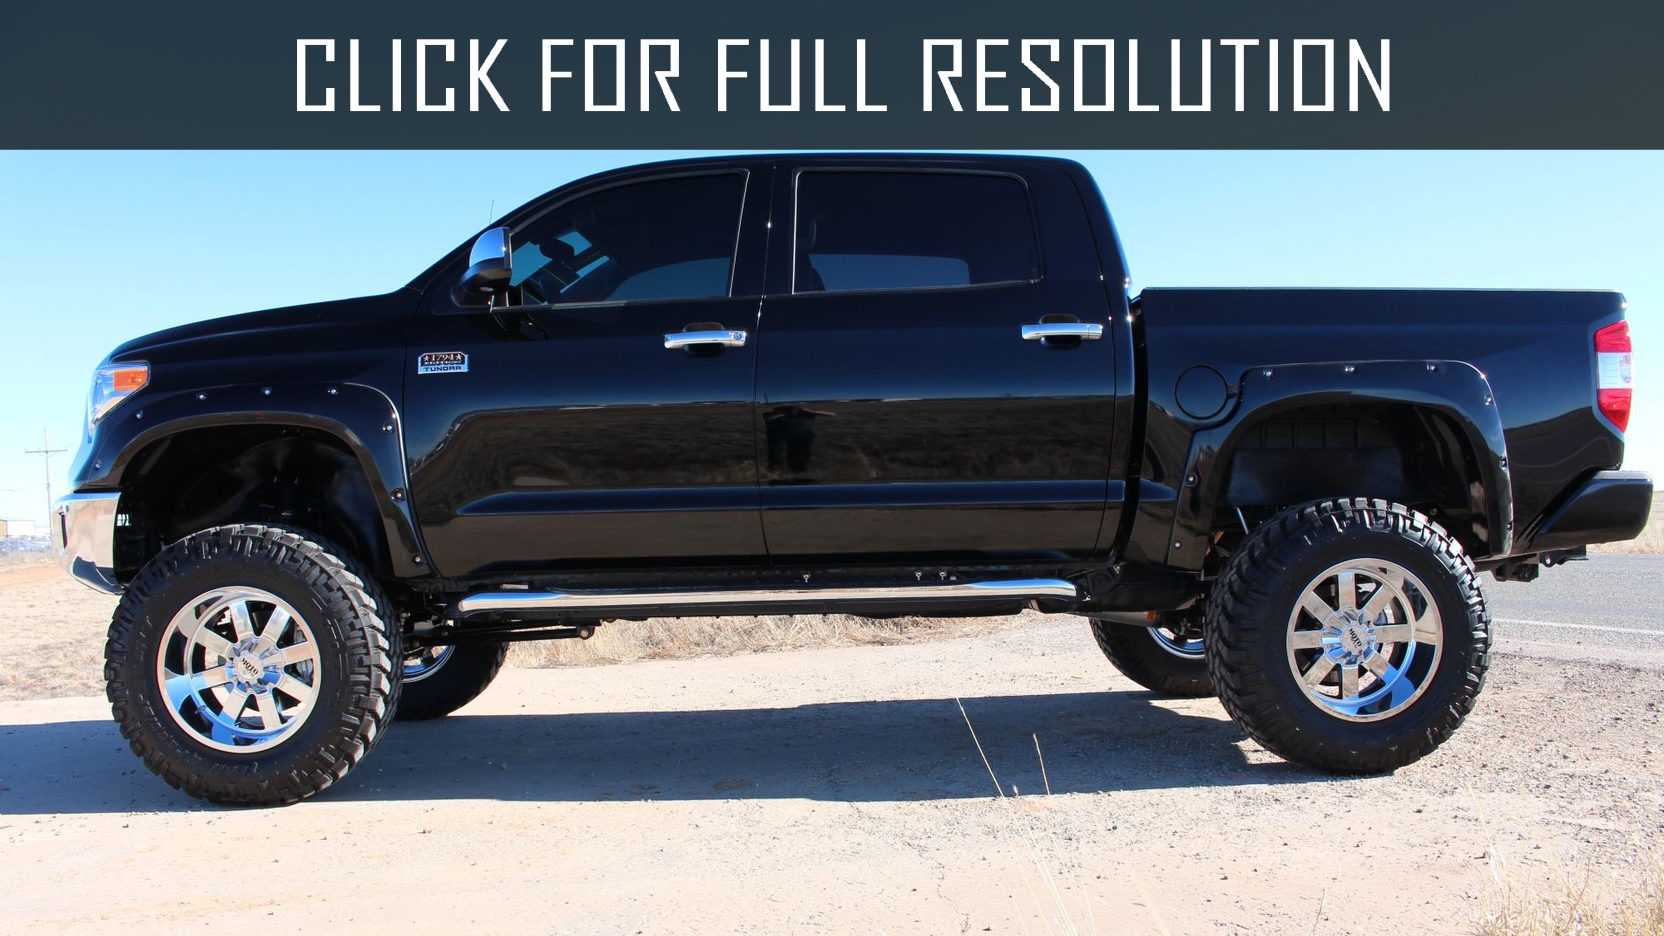 Toyota Tundra 1794 Edition Lifted - amazing photo gallery, some